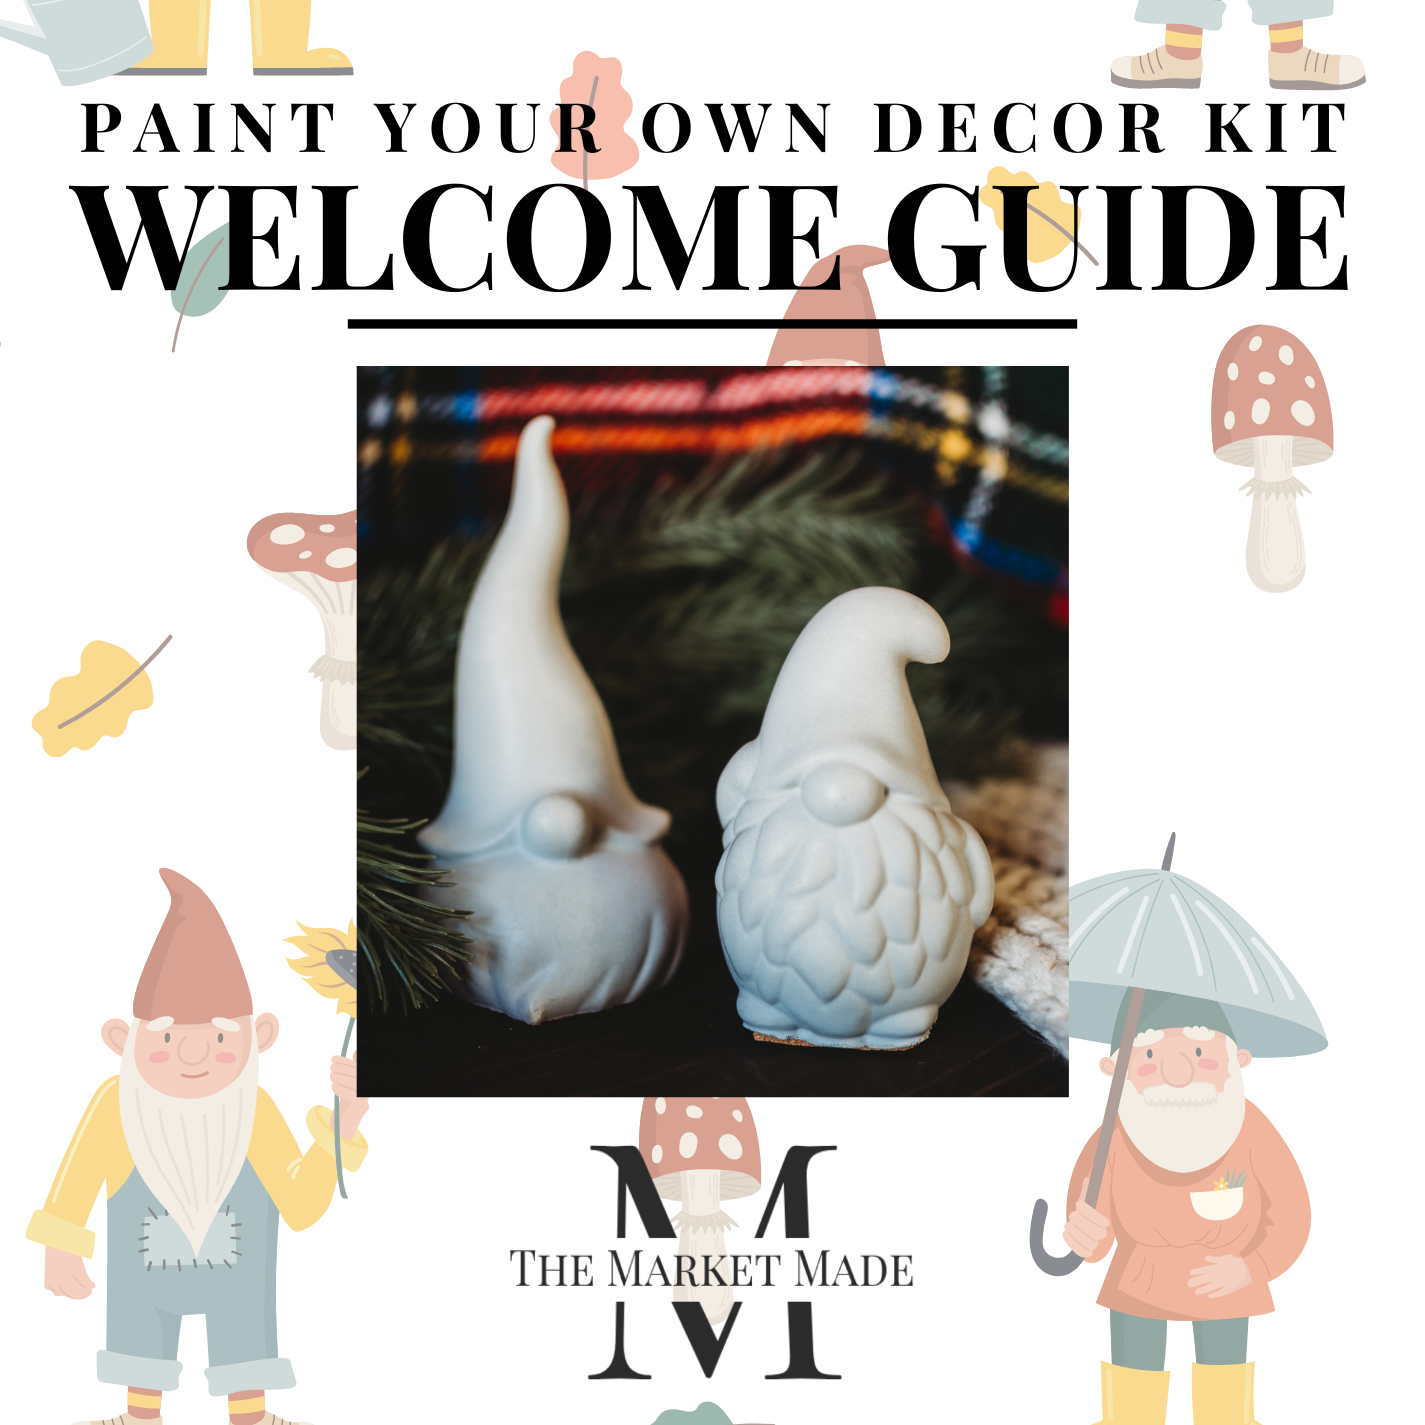 Paint Your Own Decor Kit Welcome Guide Digital Download | Paint Your Own Concrete Decor Color Guide